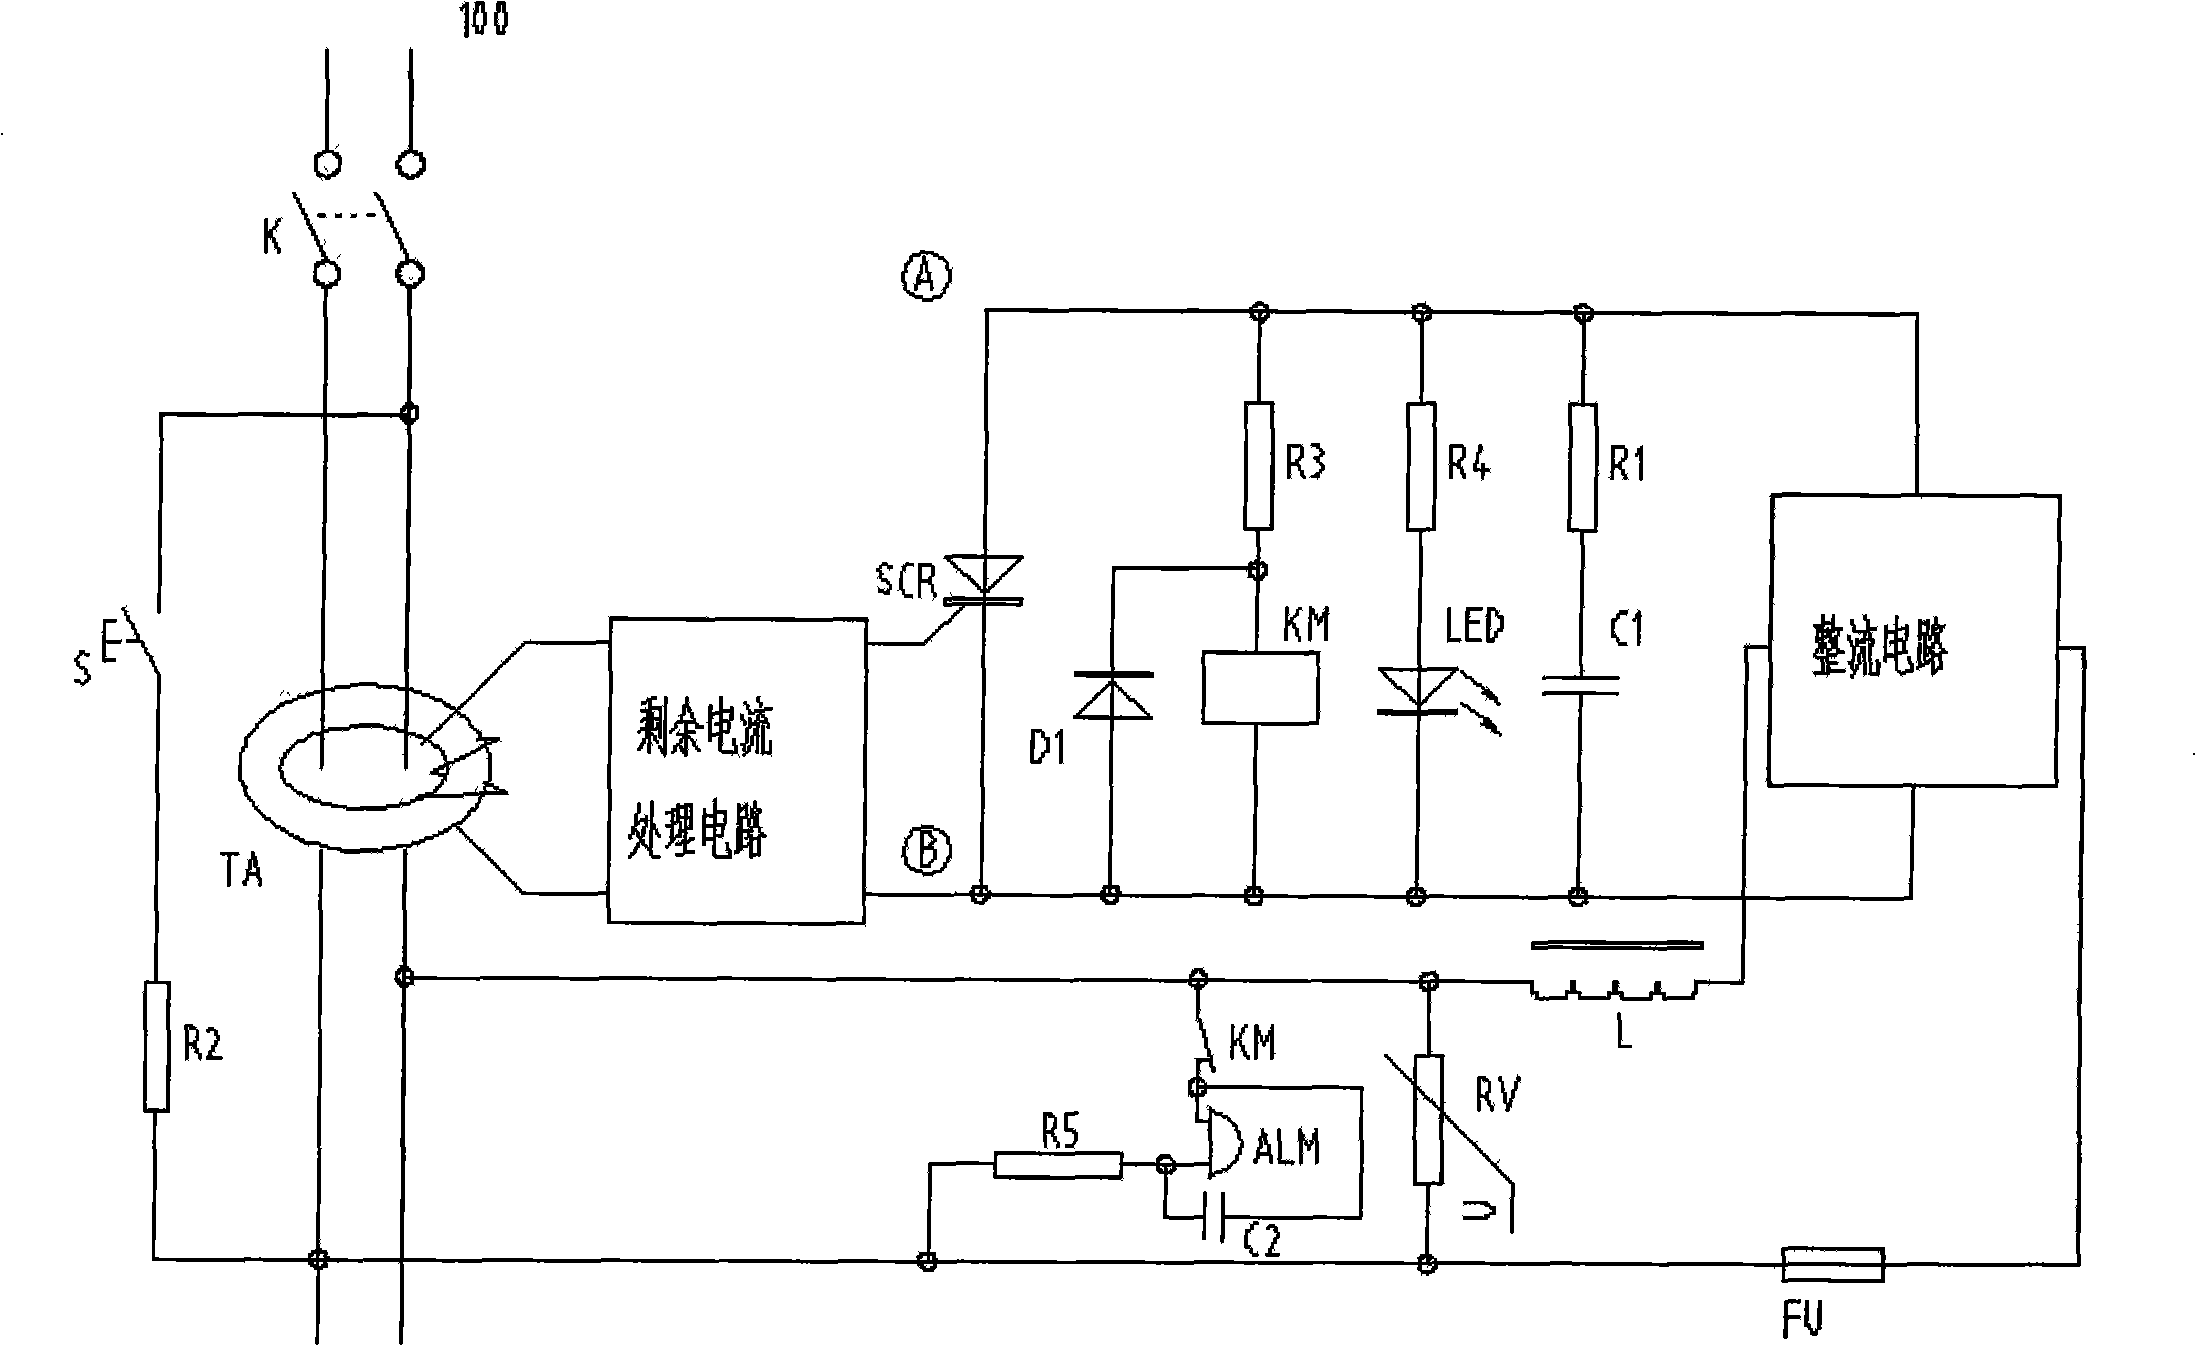 Aftercurrent action protector with self-diagnostic function